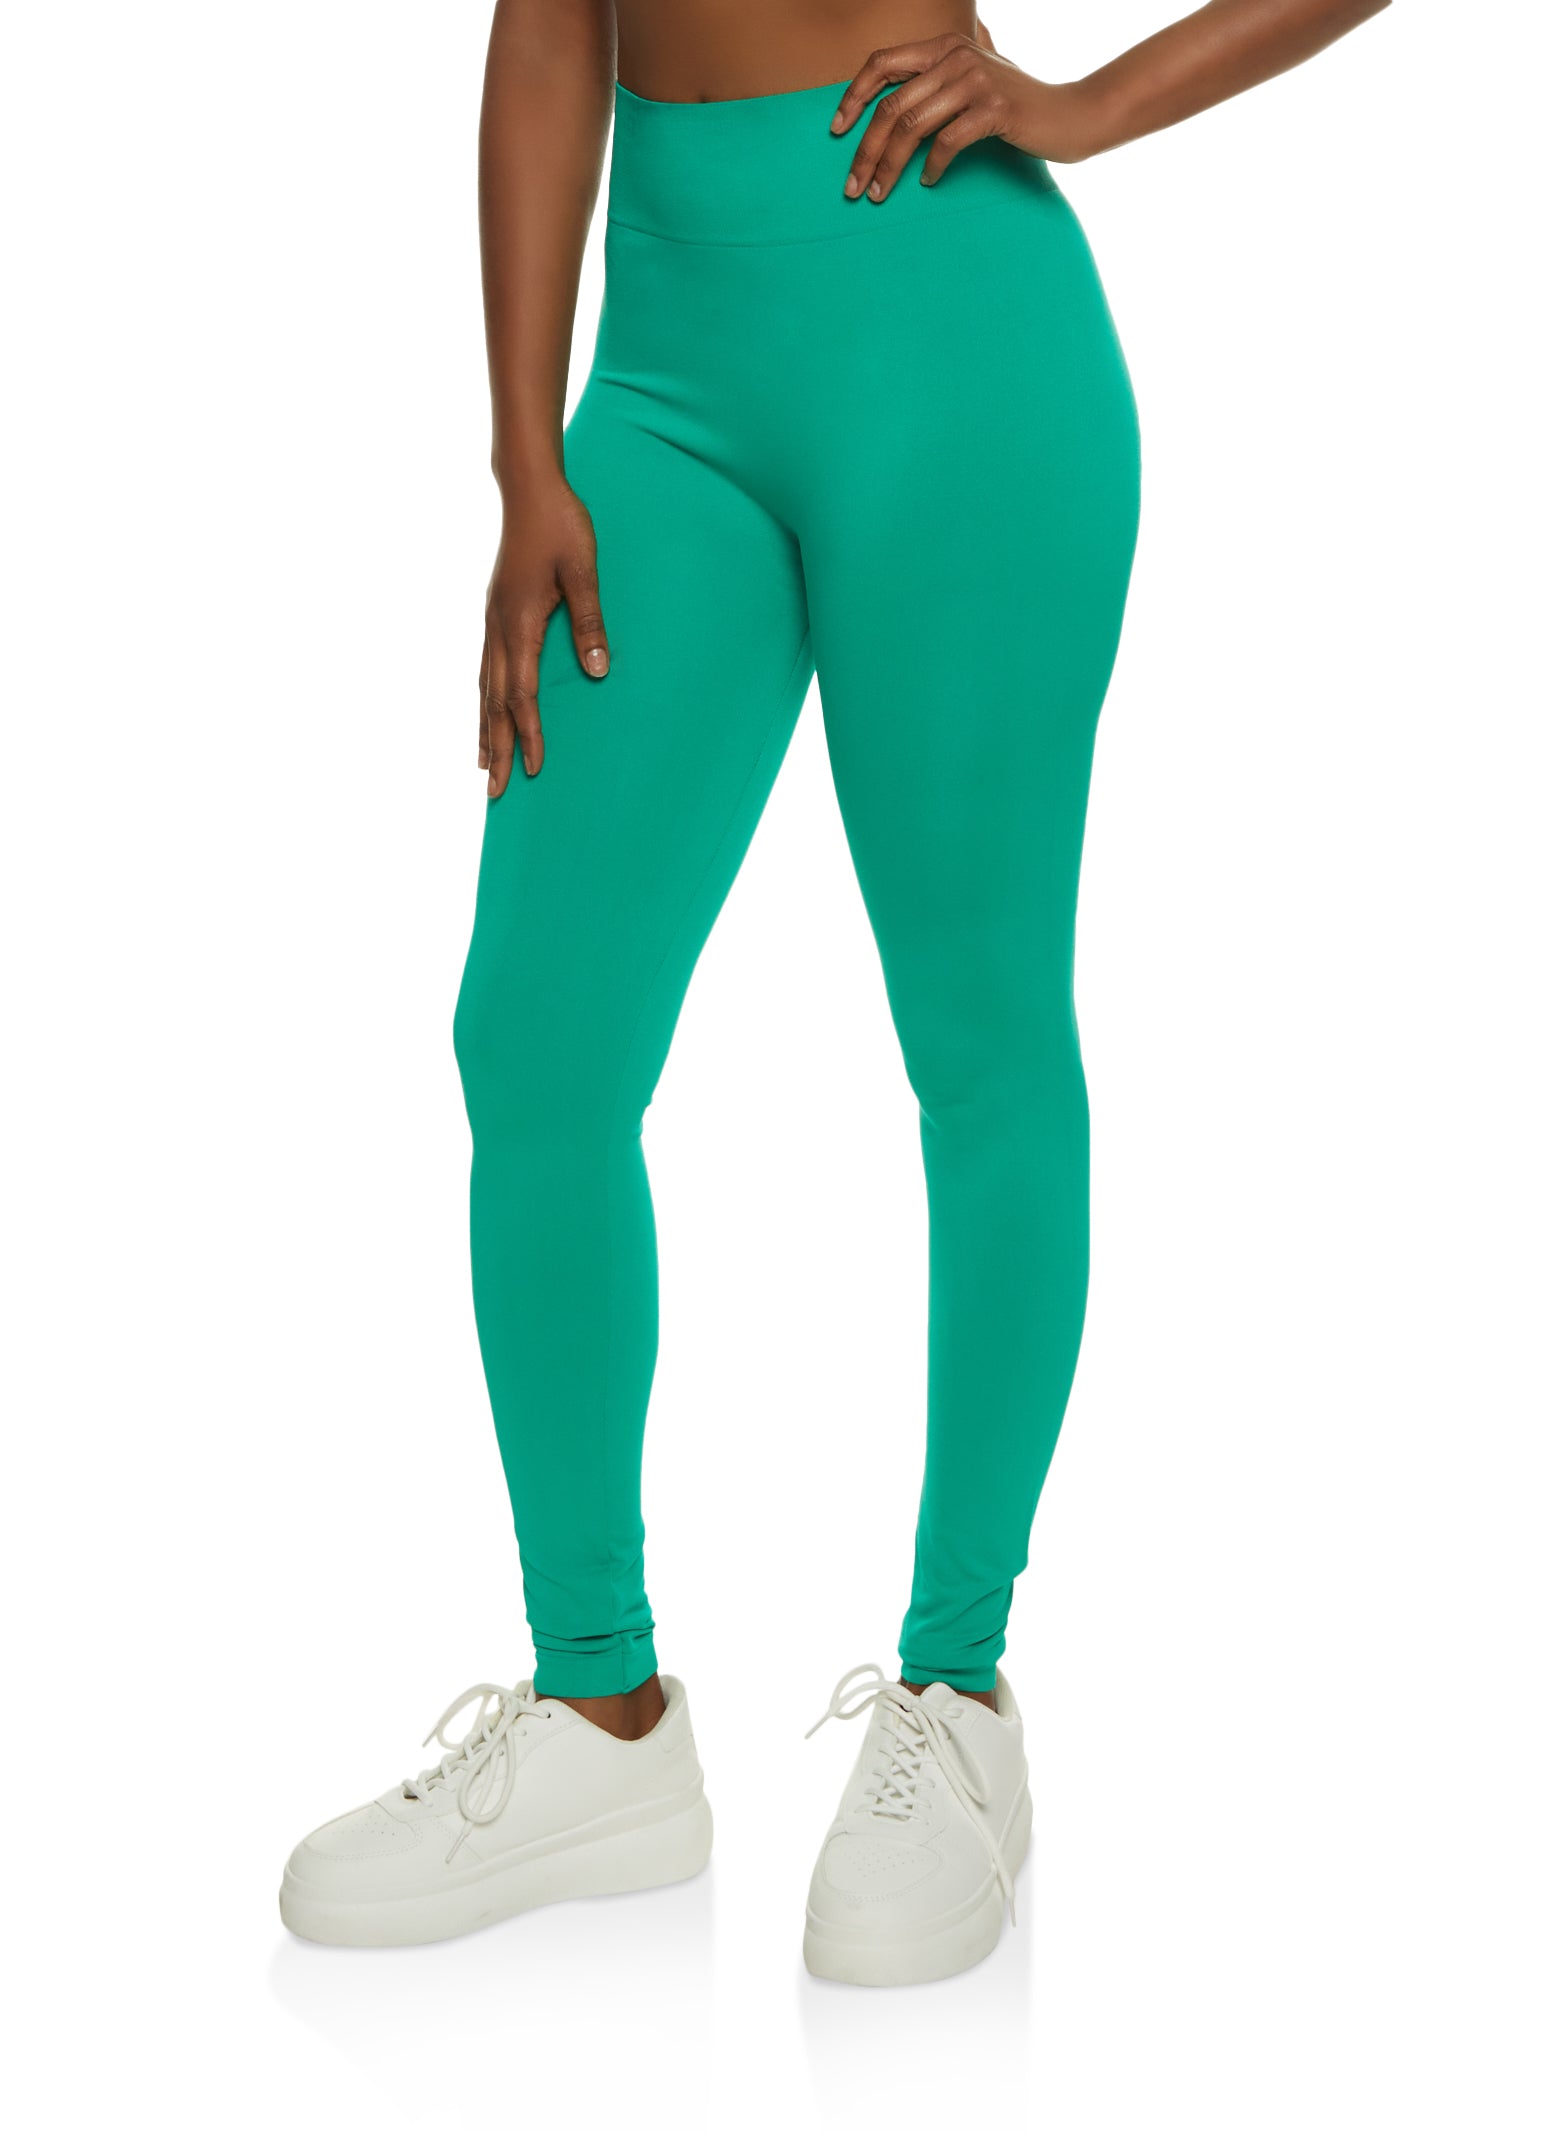 Green Flames Colourful Fire Leggings for Sale by Ninjakandy